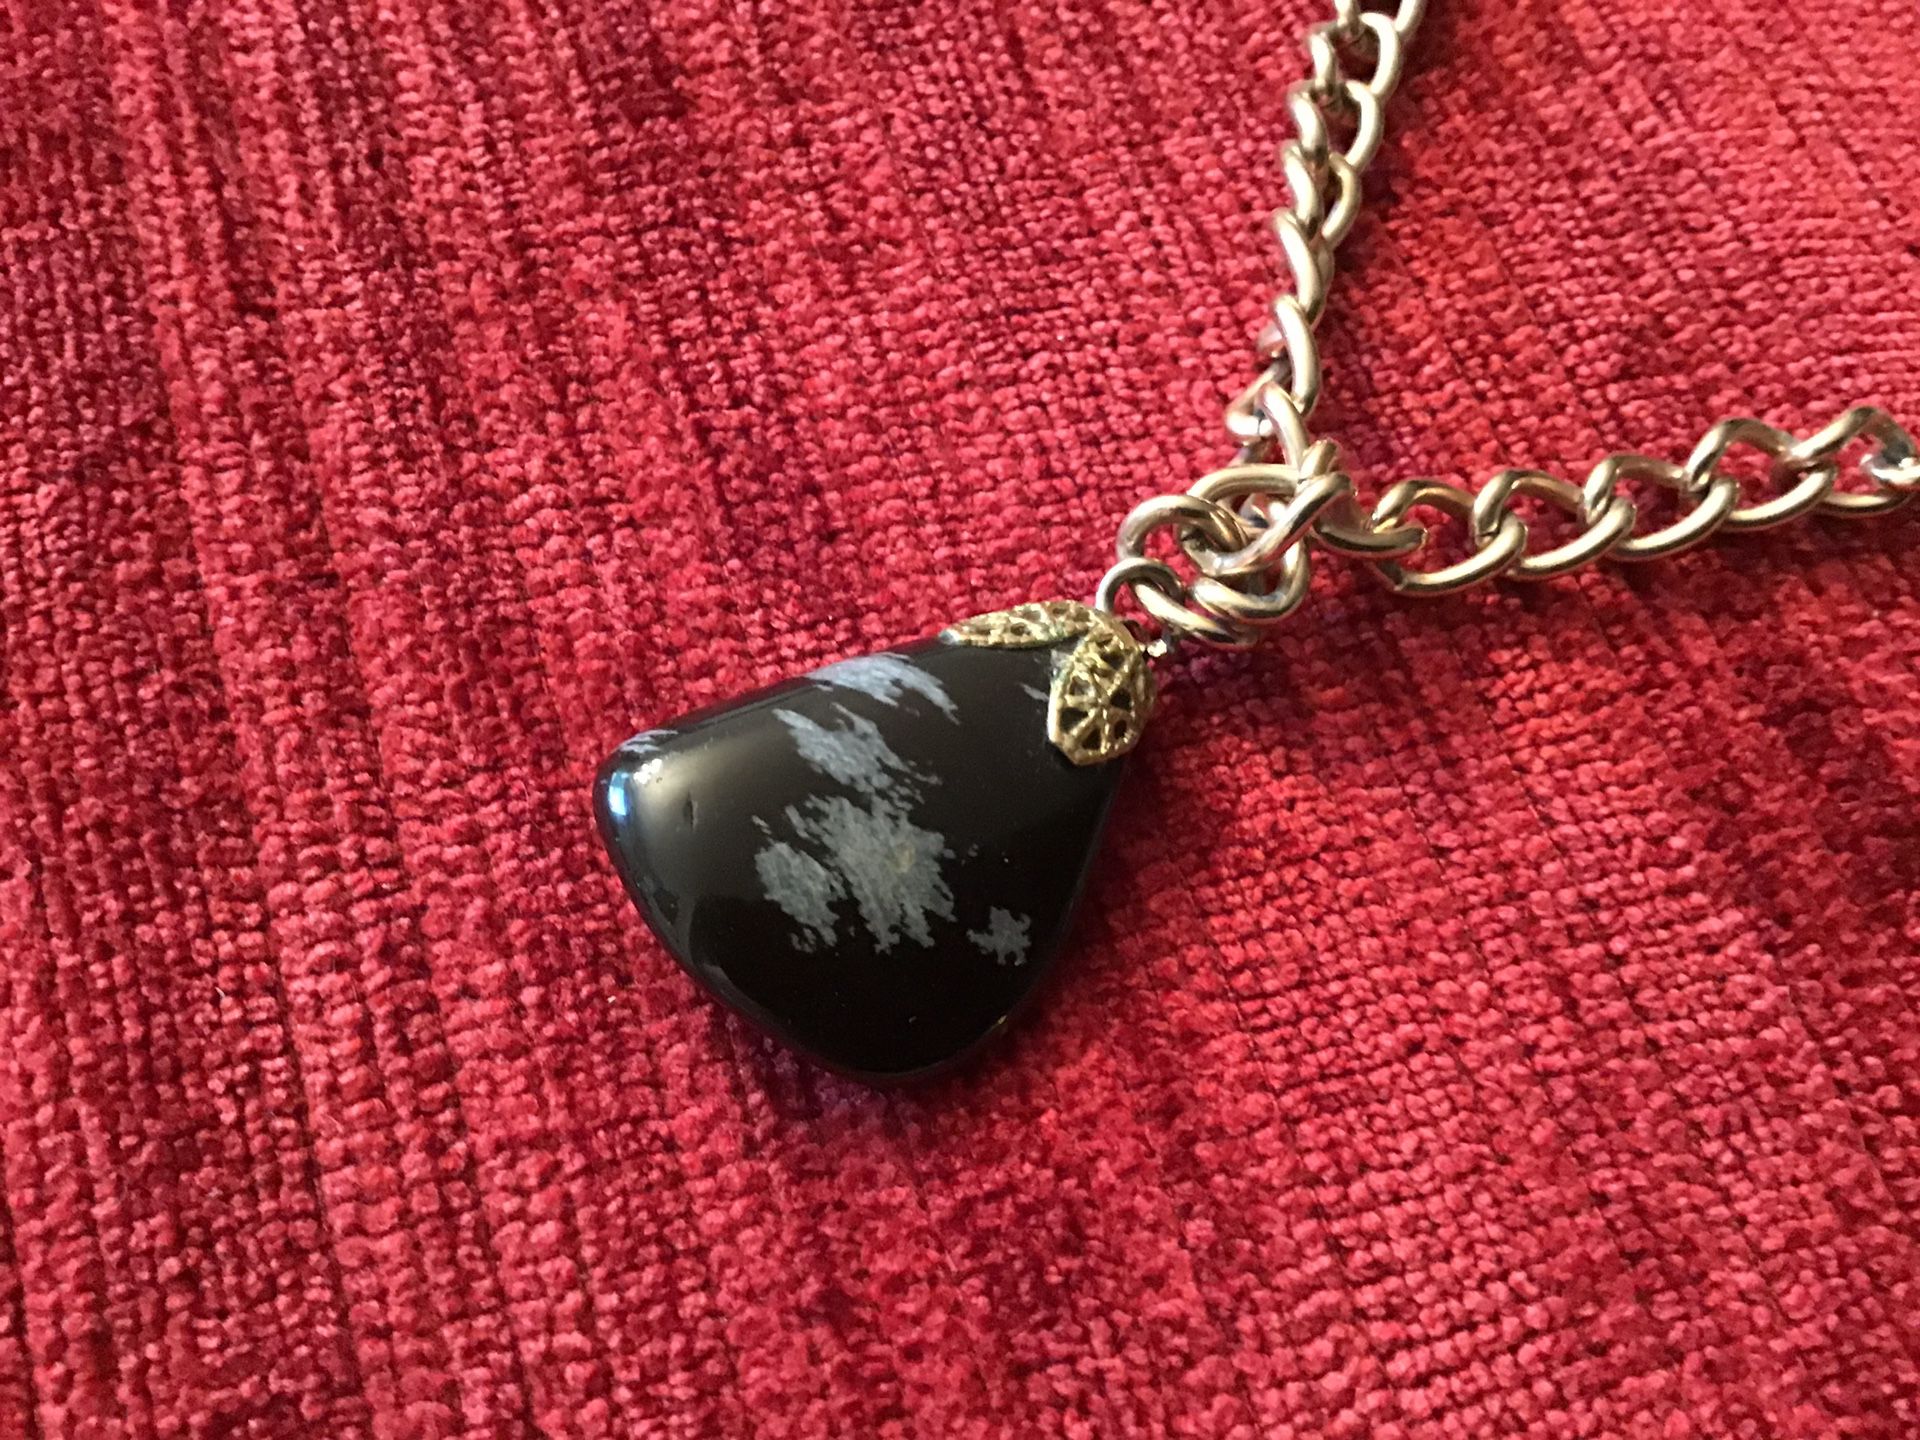 Snowflake Obsidian necklace